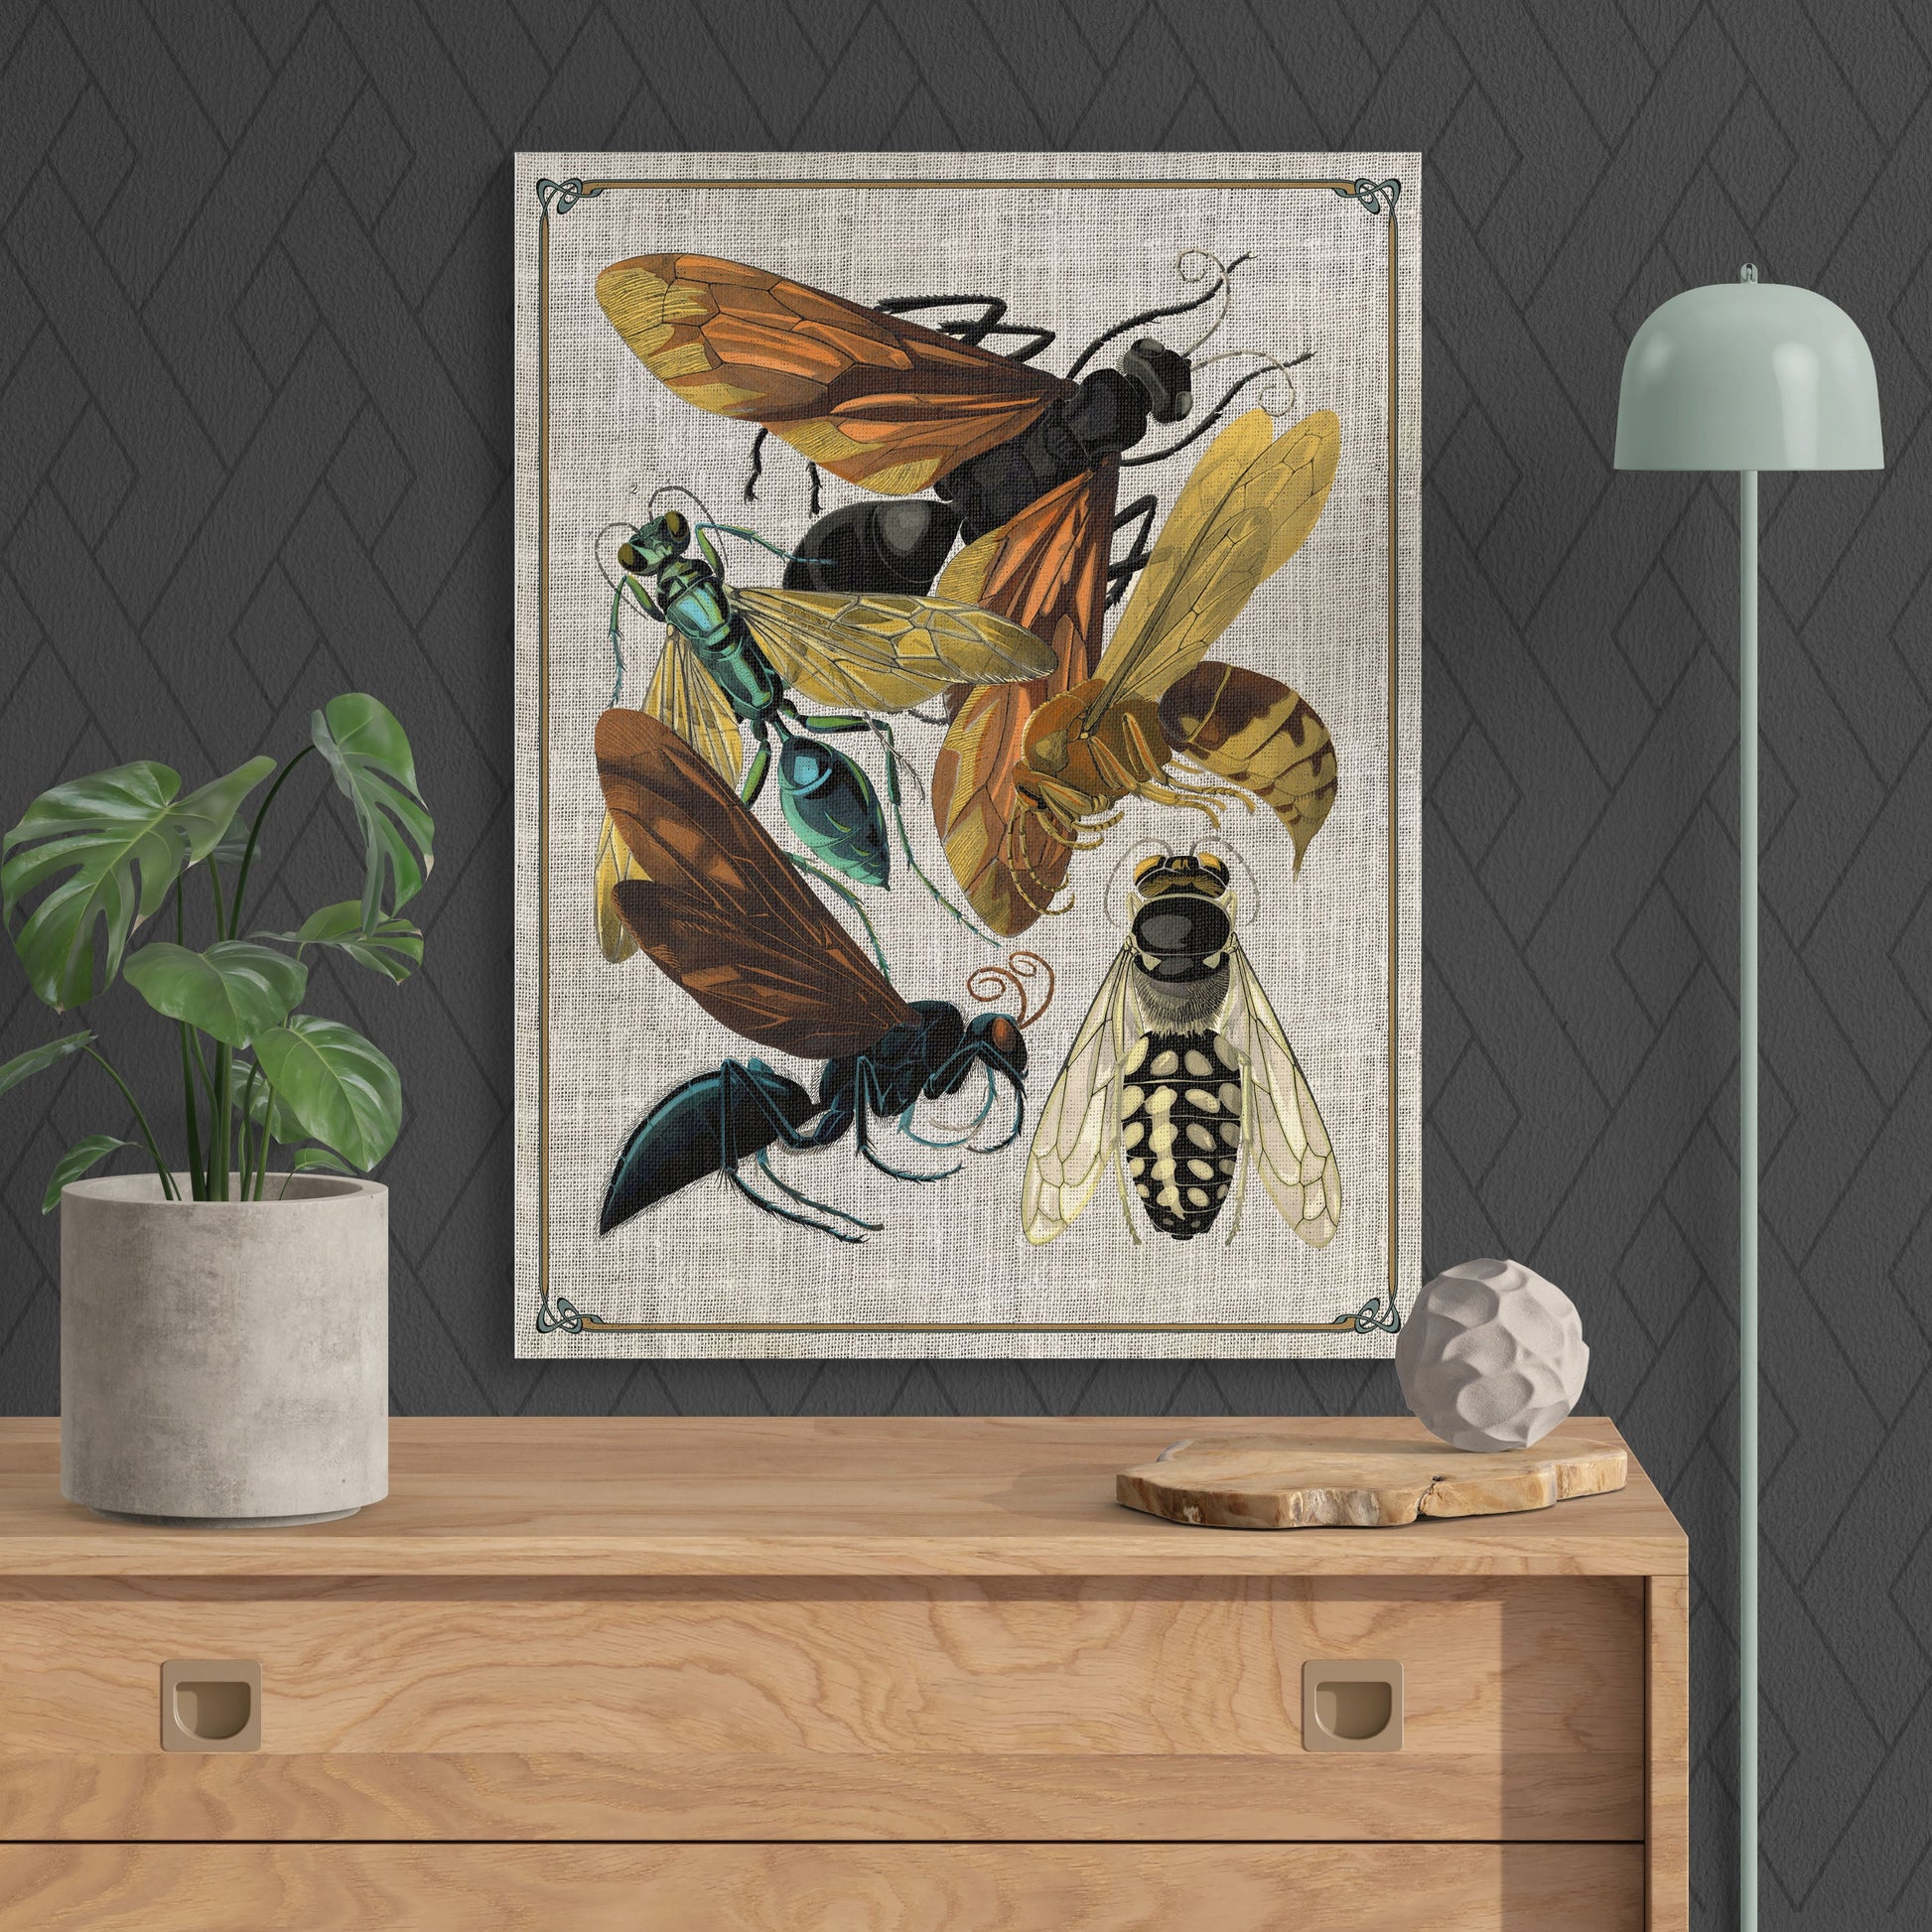 Antique Art Nouveau Wasp Insect Collage - Retro Reverence